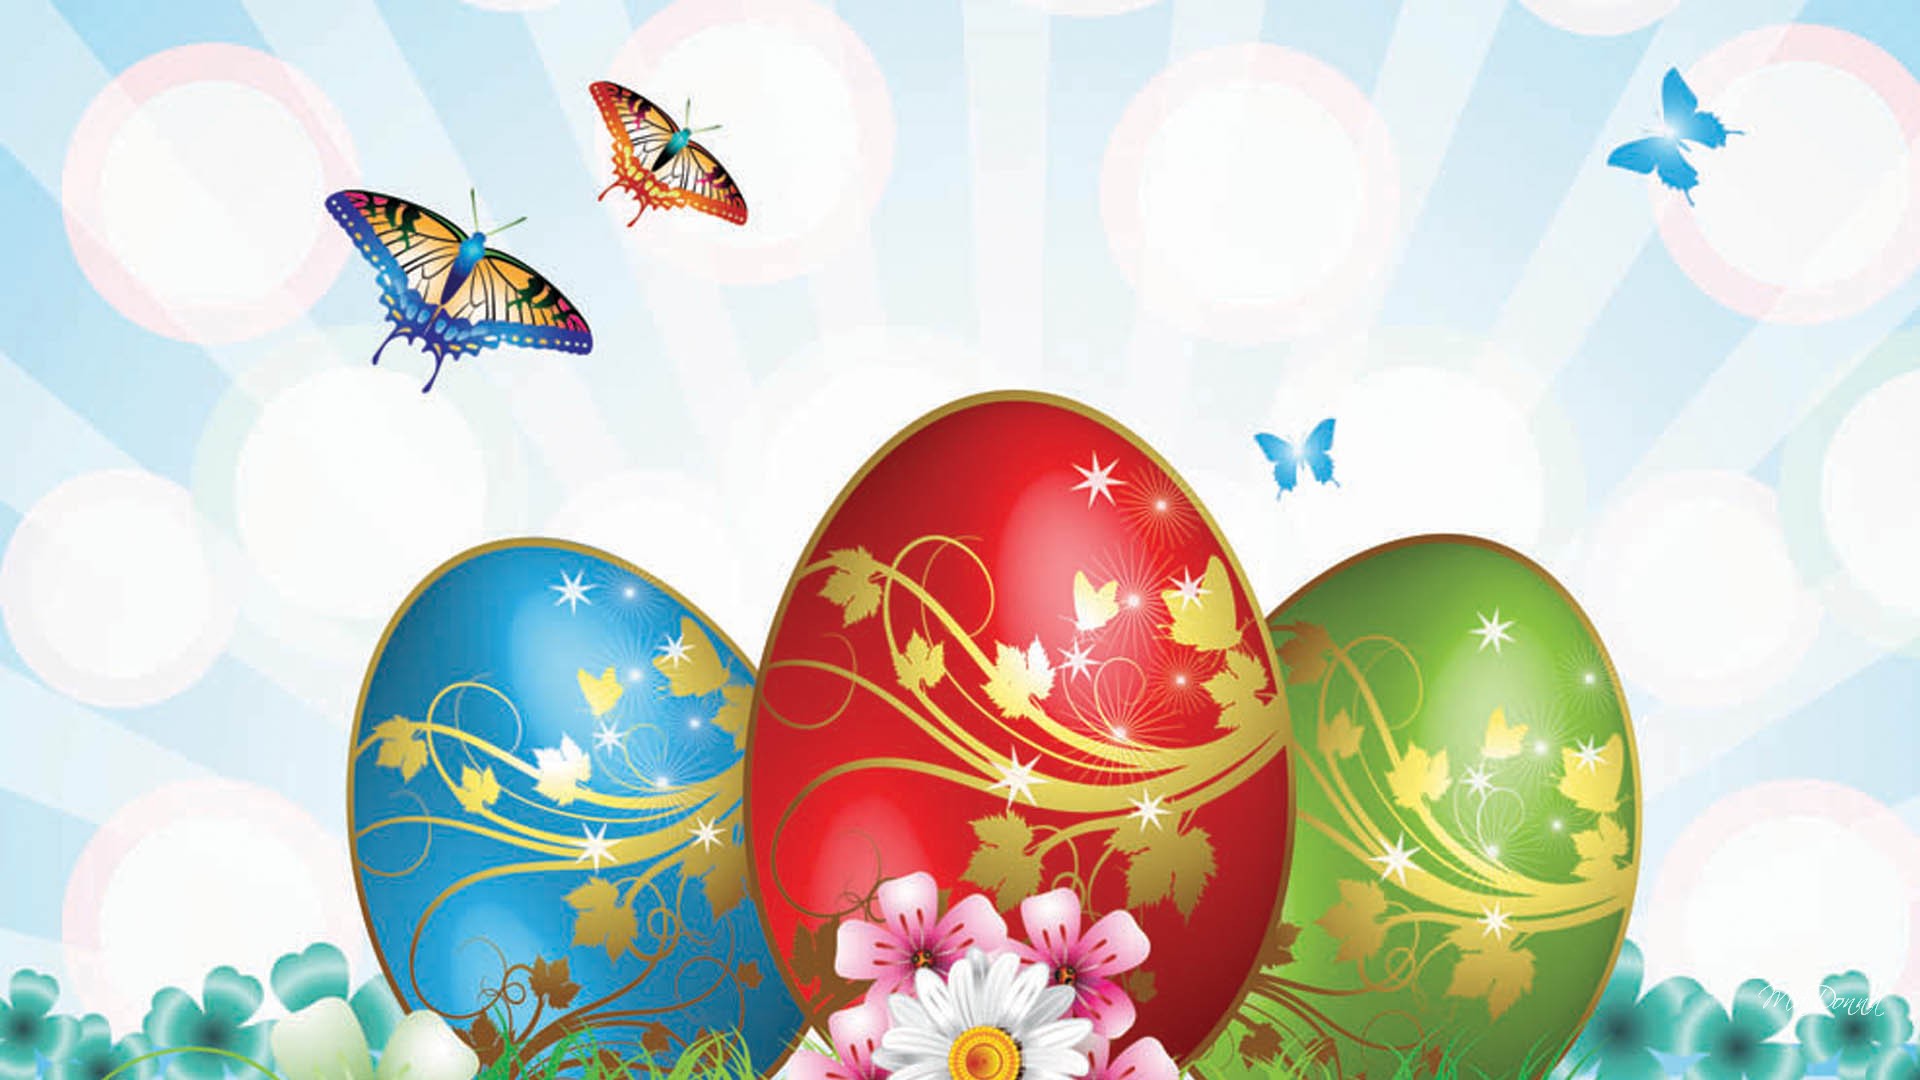 Easter Sunday Eggs Design Image Colorful Pictures Pics HD